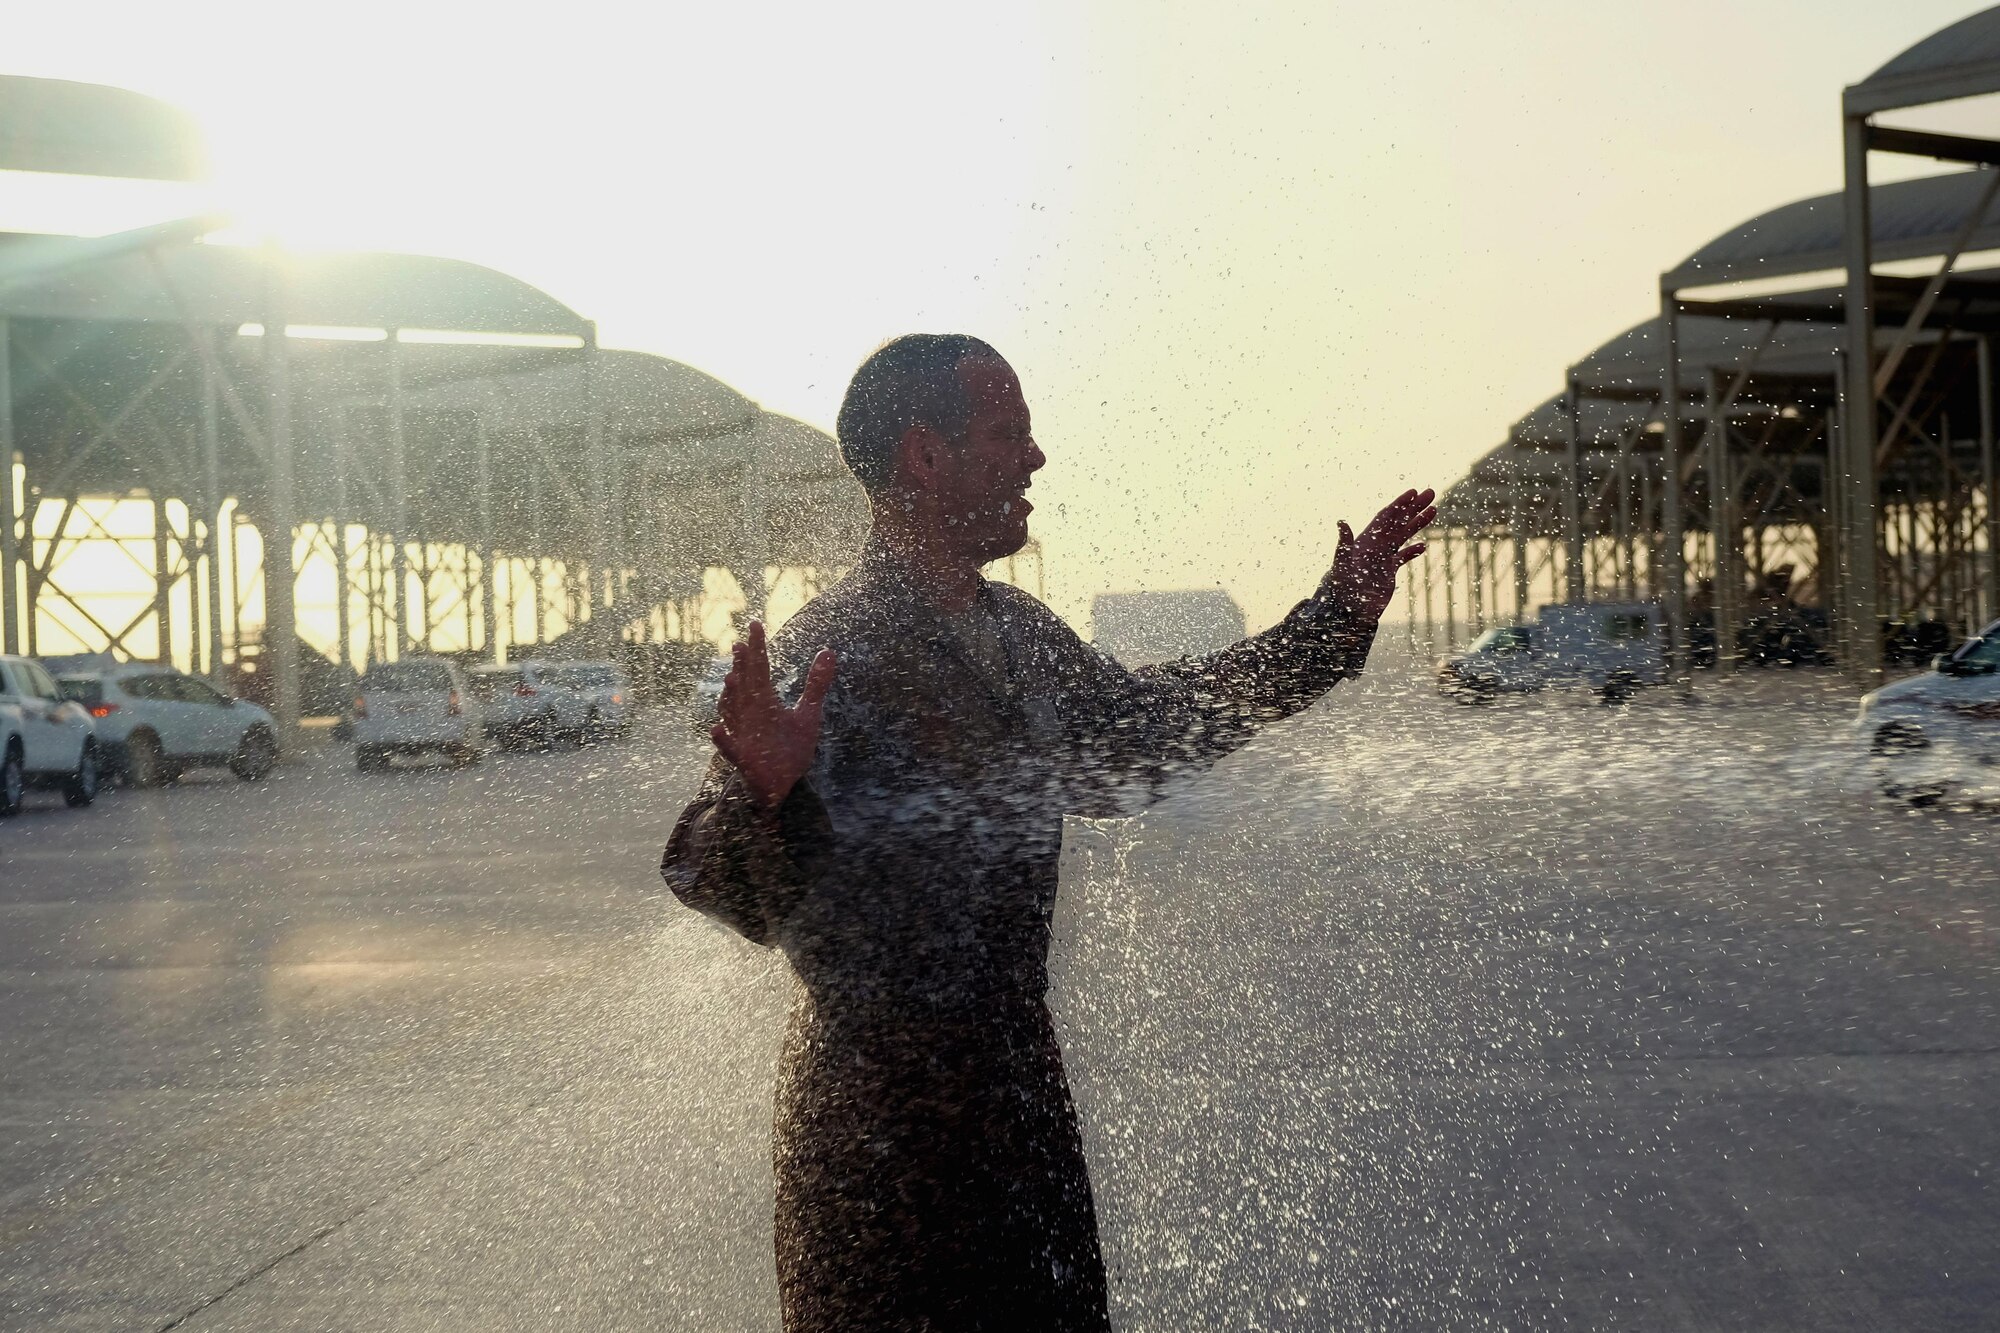 Brig. Gen. Charles S. Corcoran, 380th Air Expeditionary Wing commander, gets sprayed with water at his fini-flight June 30, 2017, at an undisclosed location in southwest Asia. Members of the 380th Expeditionary Civil Engineer Squadron Fire Department sprayed the general with a fire hose. (U.S. Air Force photo by Senior Airman Preston Webb)